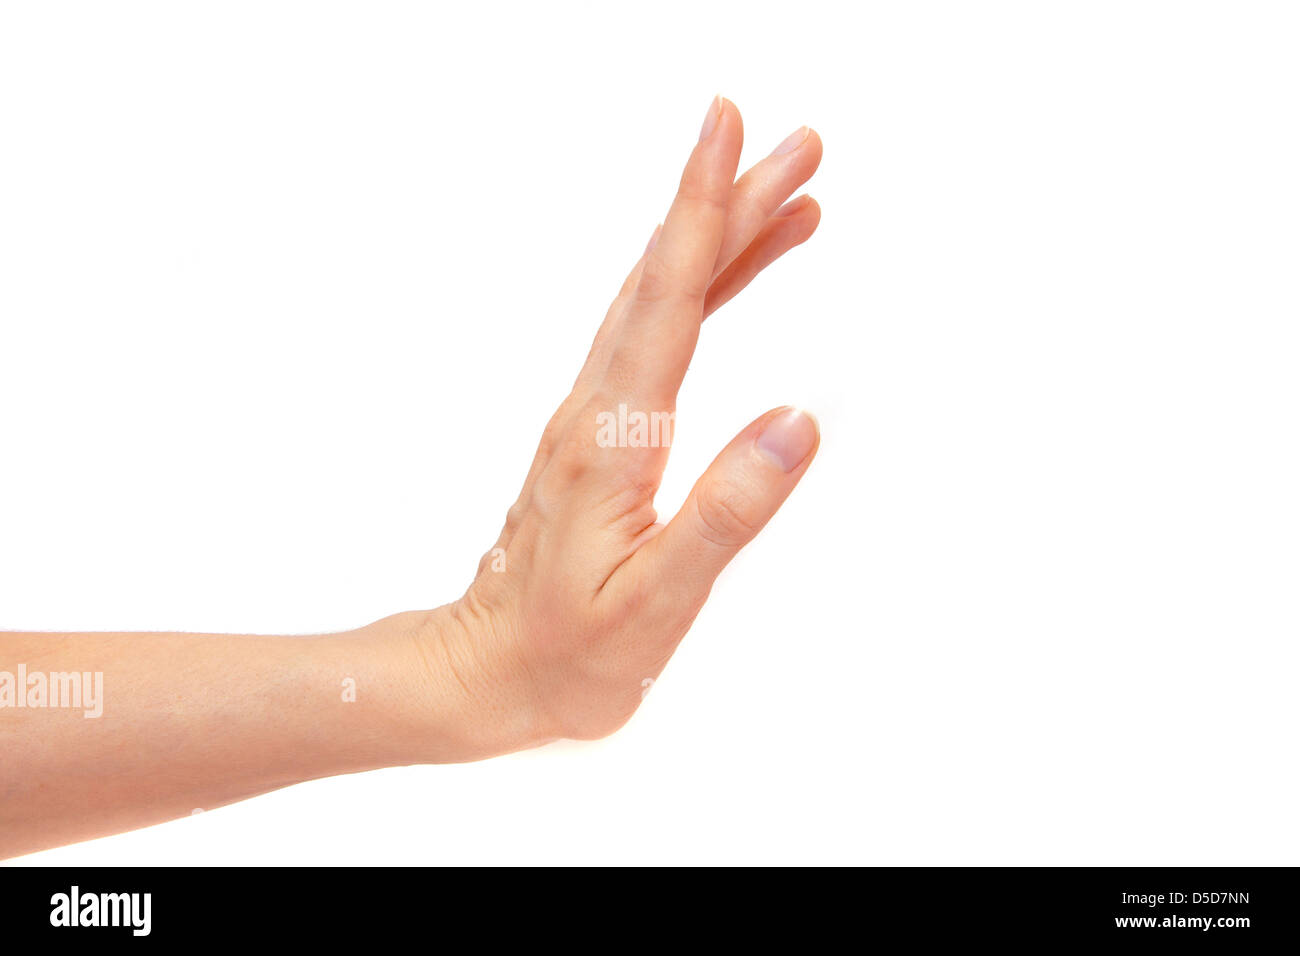 Stop hand gesture by female hand isolated on white background Stock Photo